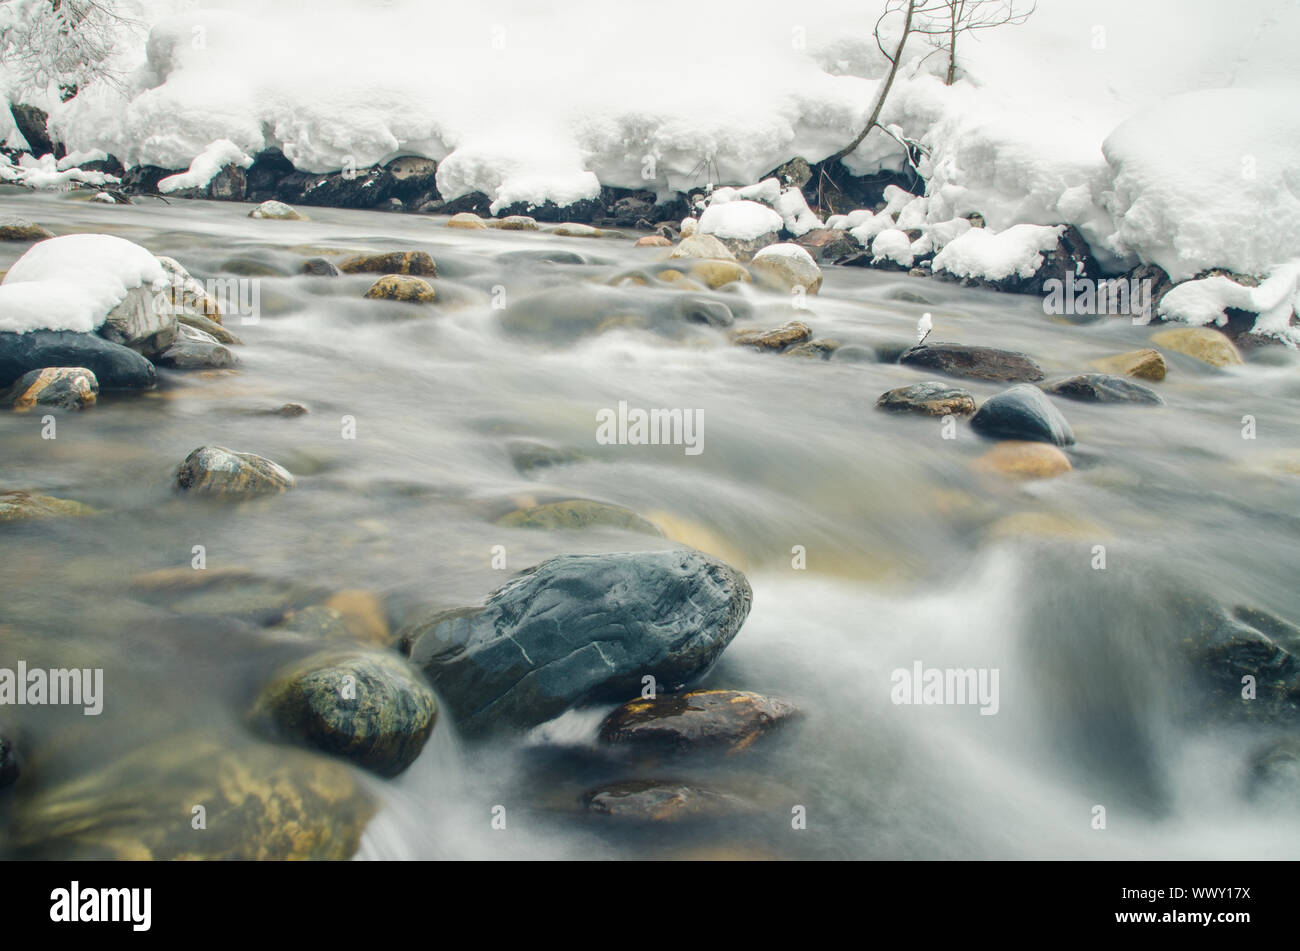 Rapidly flowing winter mountain river, blurred by a slow shutter speed Stock Photo